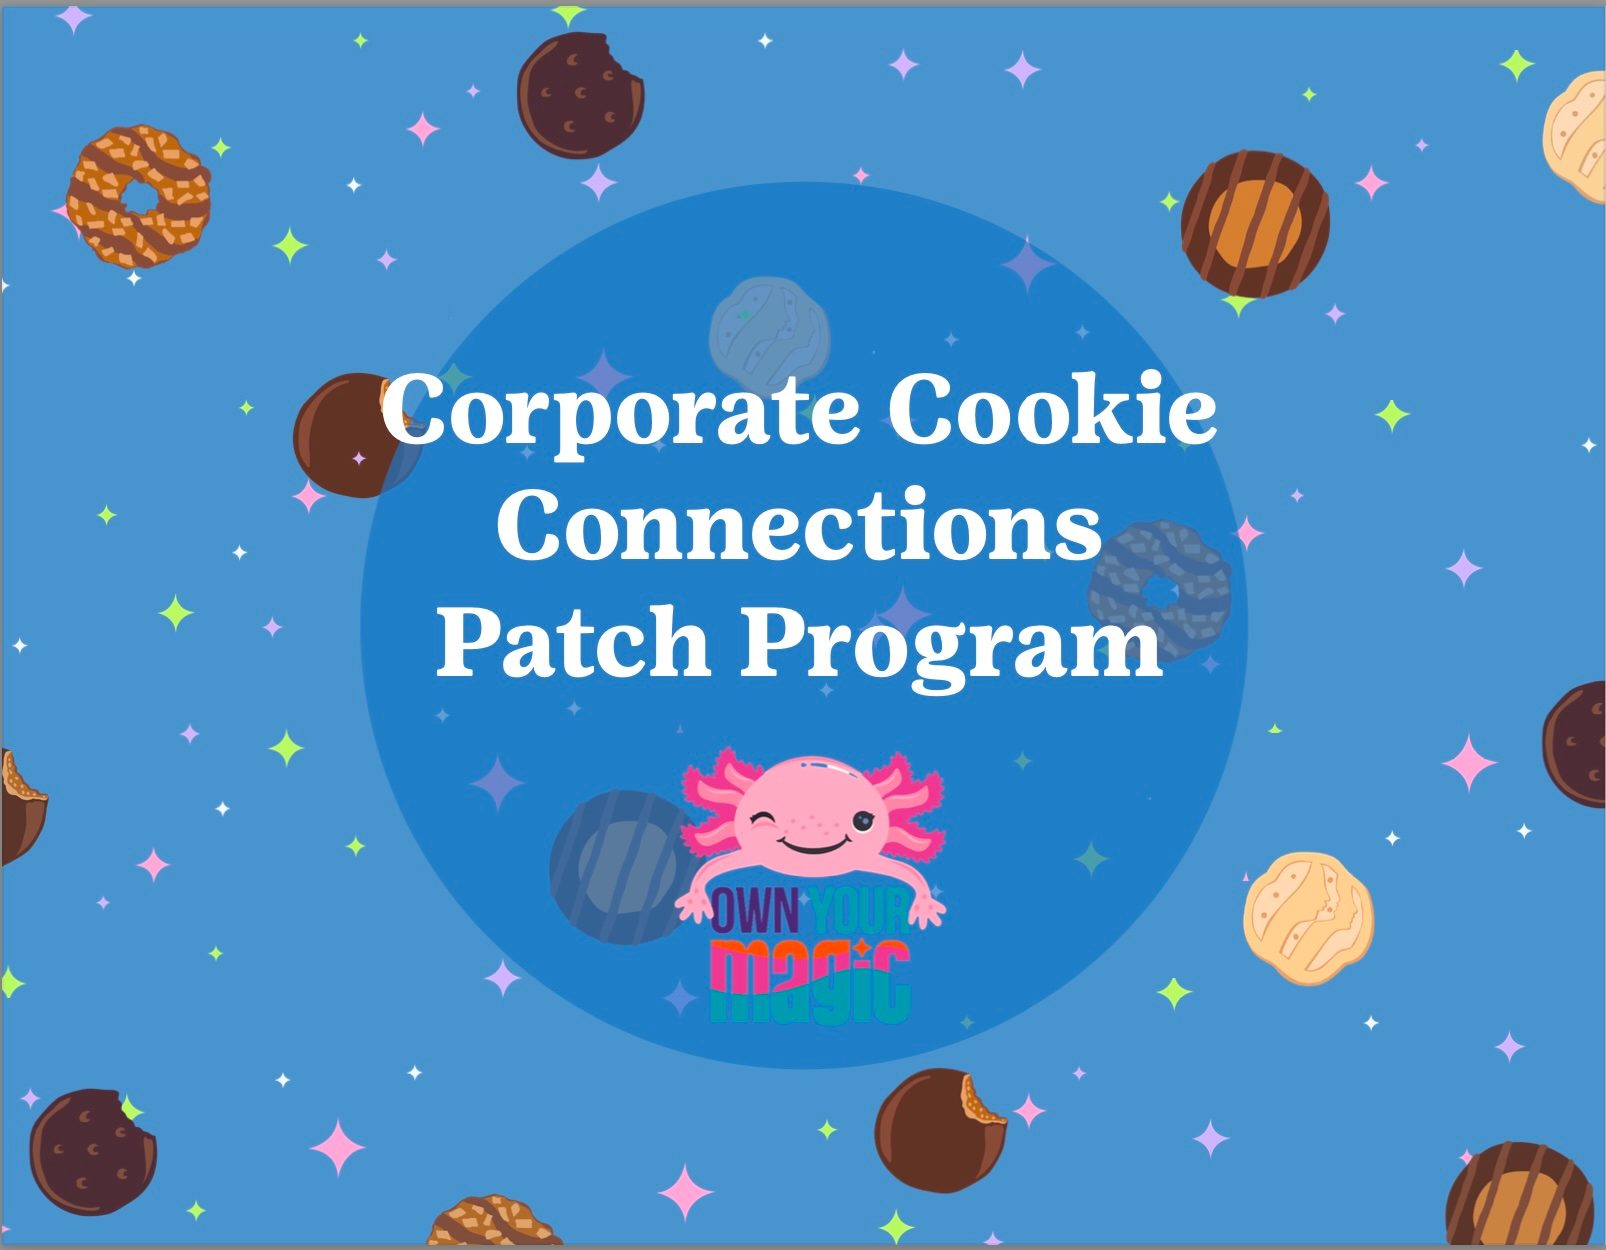 Corporate Cookie Connections guide